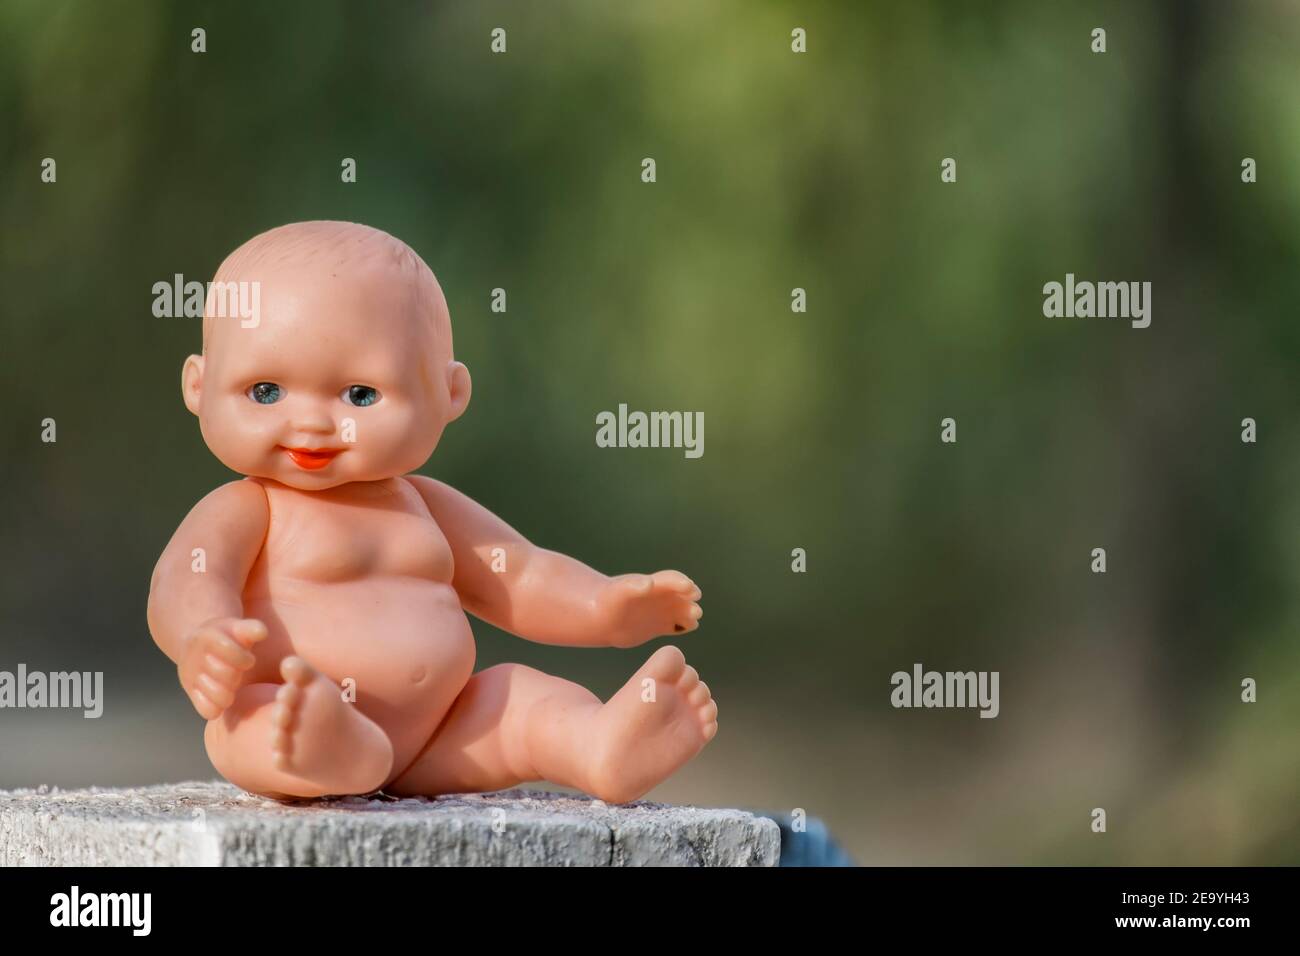 Old little naked baby doll on a blurry green background Stock Photo